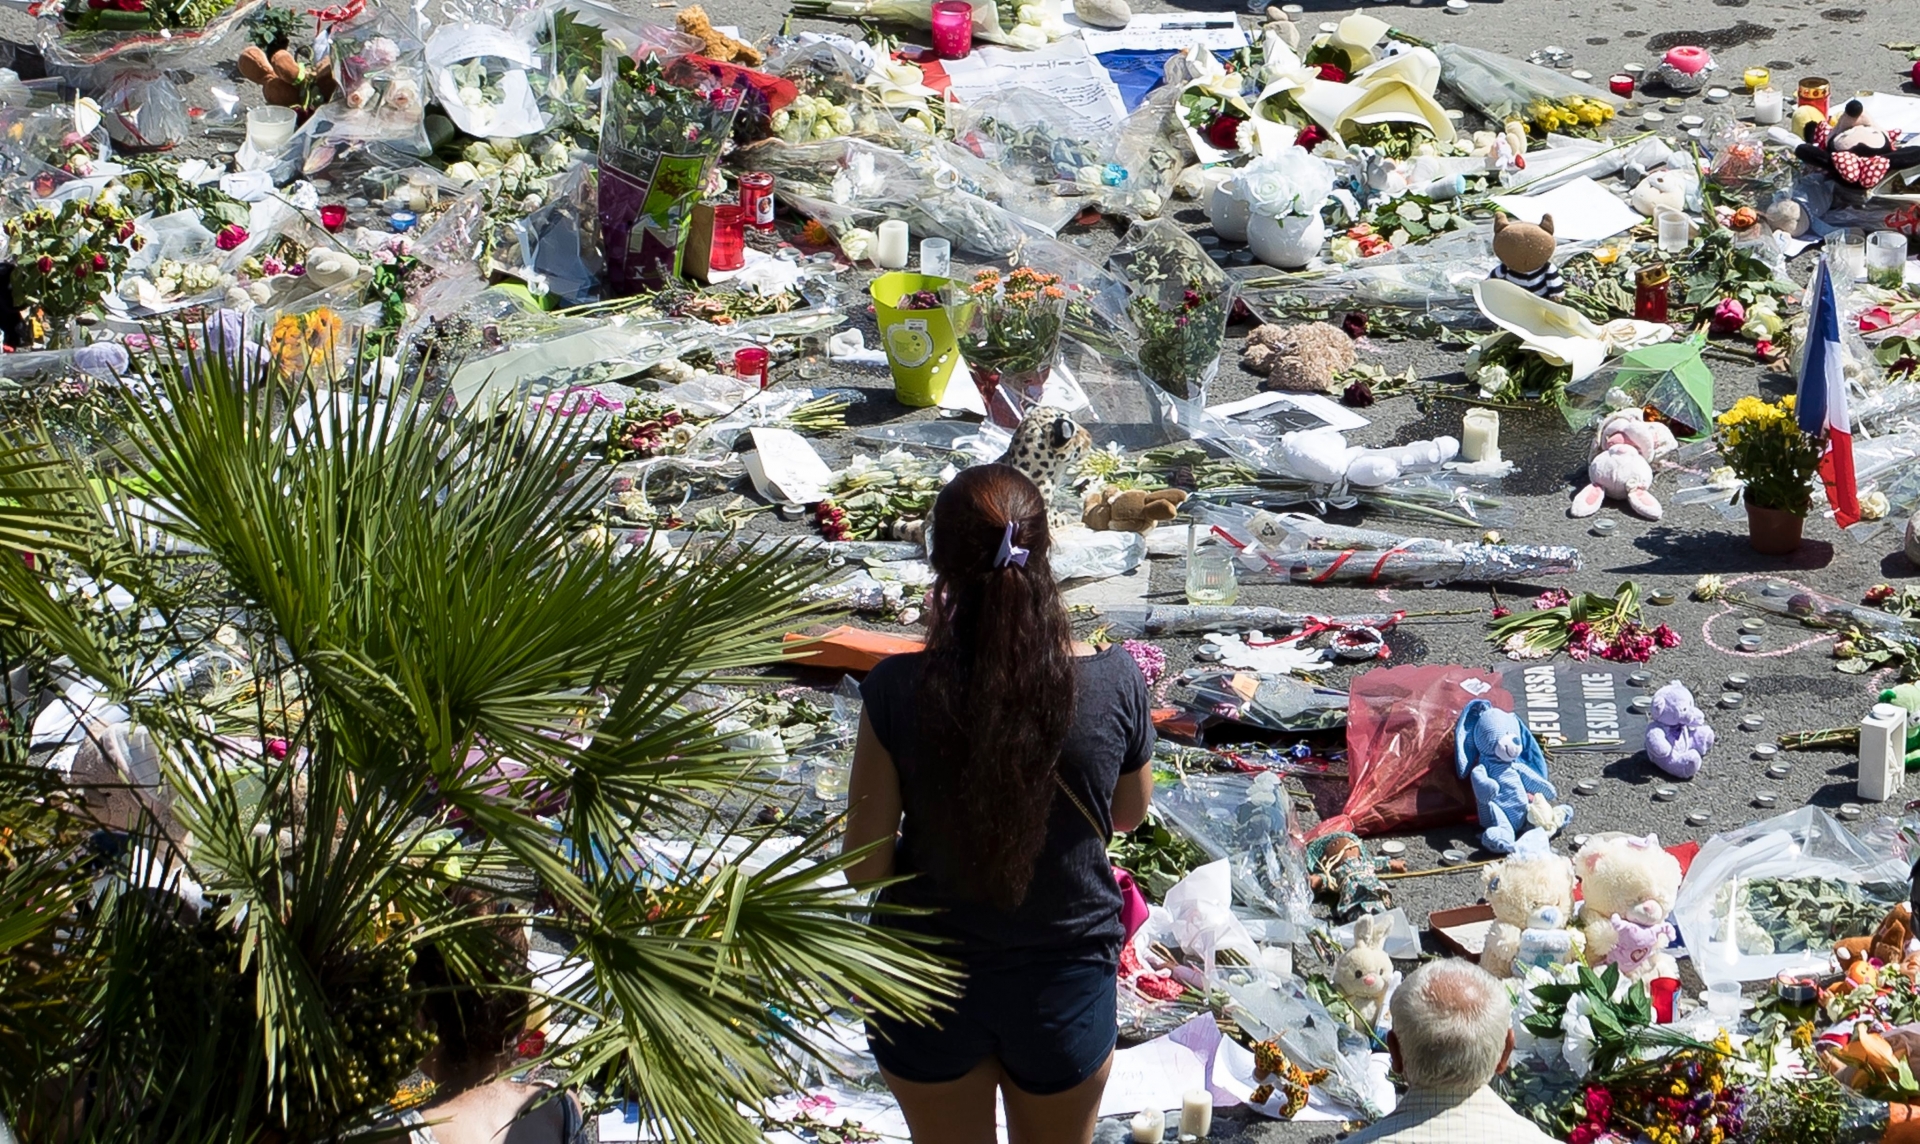 epa05429297 A woman looks at a makeshift memorial of flowers and candles on the 'Promenade des Anglais' where a truck crashed into the crowd during the Bastille Day celebrations, in Nice, France, 17 July 2016. According to reports, at least 84 people died and many were wounded after a truck drove into the crowd on the famous Promenade des Anglais during celebrations of Bastille Day in Nice, late 14 July.  EPA/IAN LANGSDON